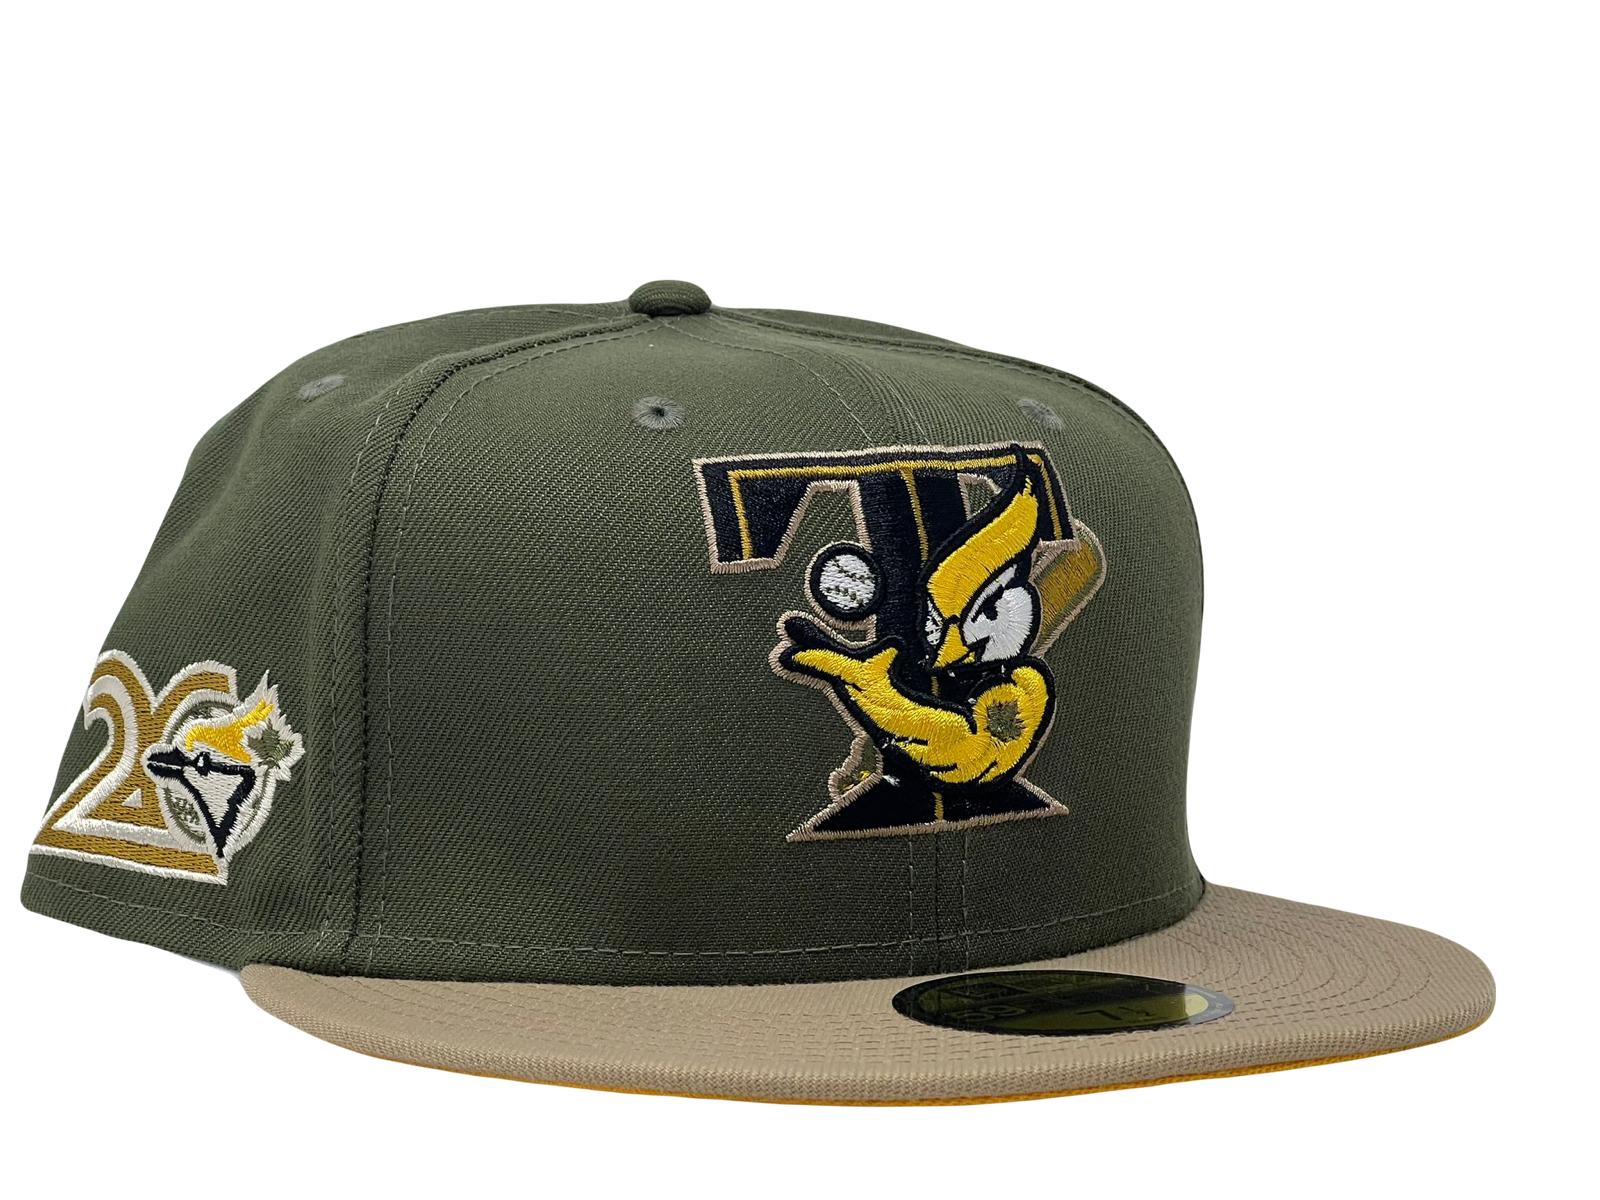 NEW ERA 59FIFTY TORONTO BLUE JAYS BLACK/GOLD FITTED HAT